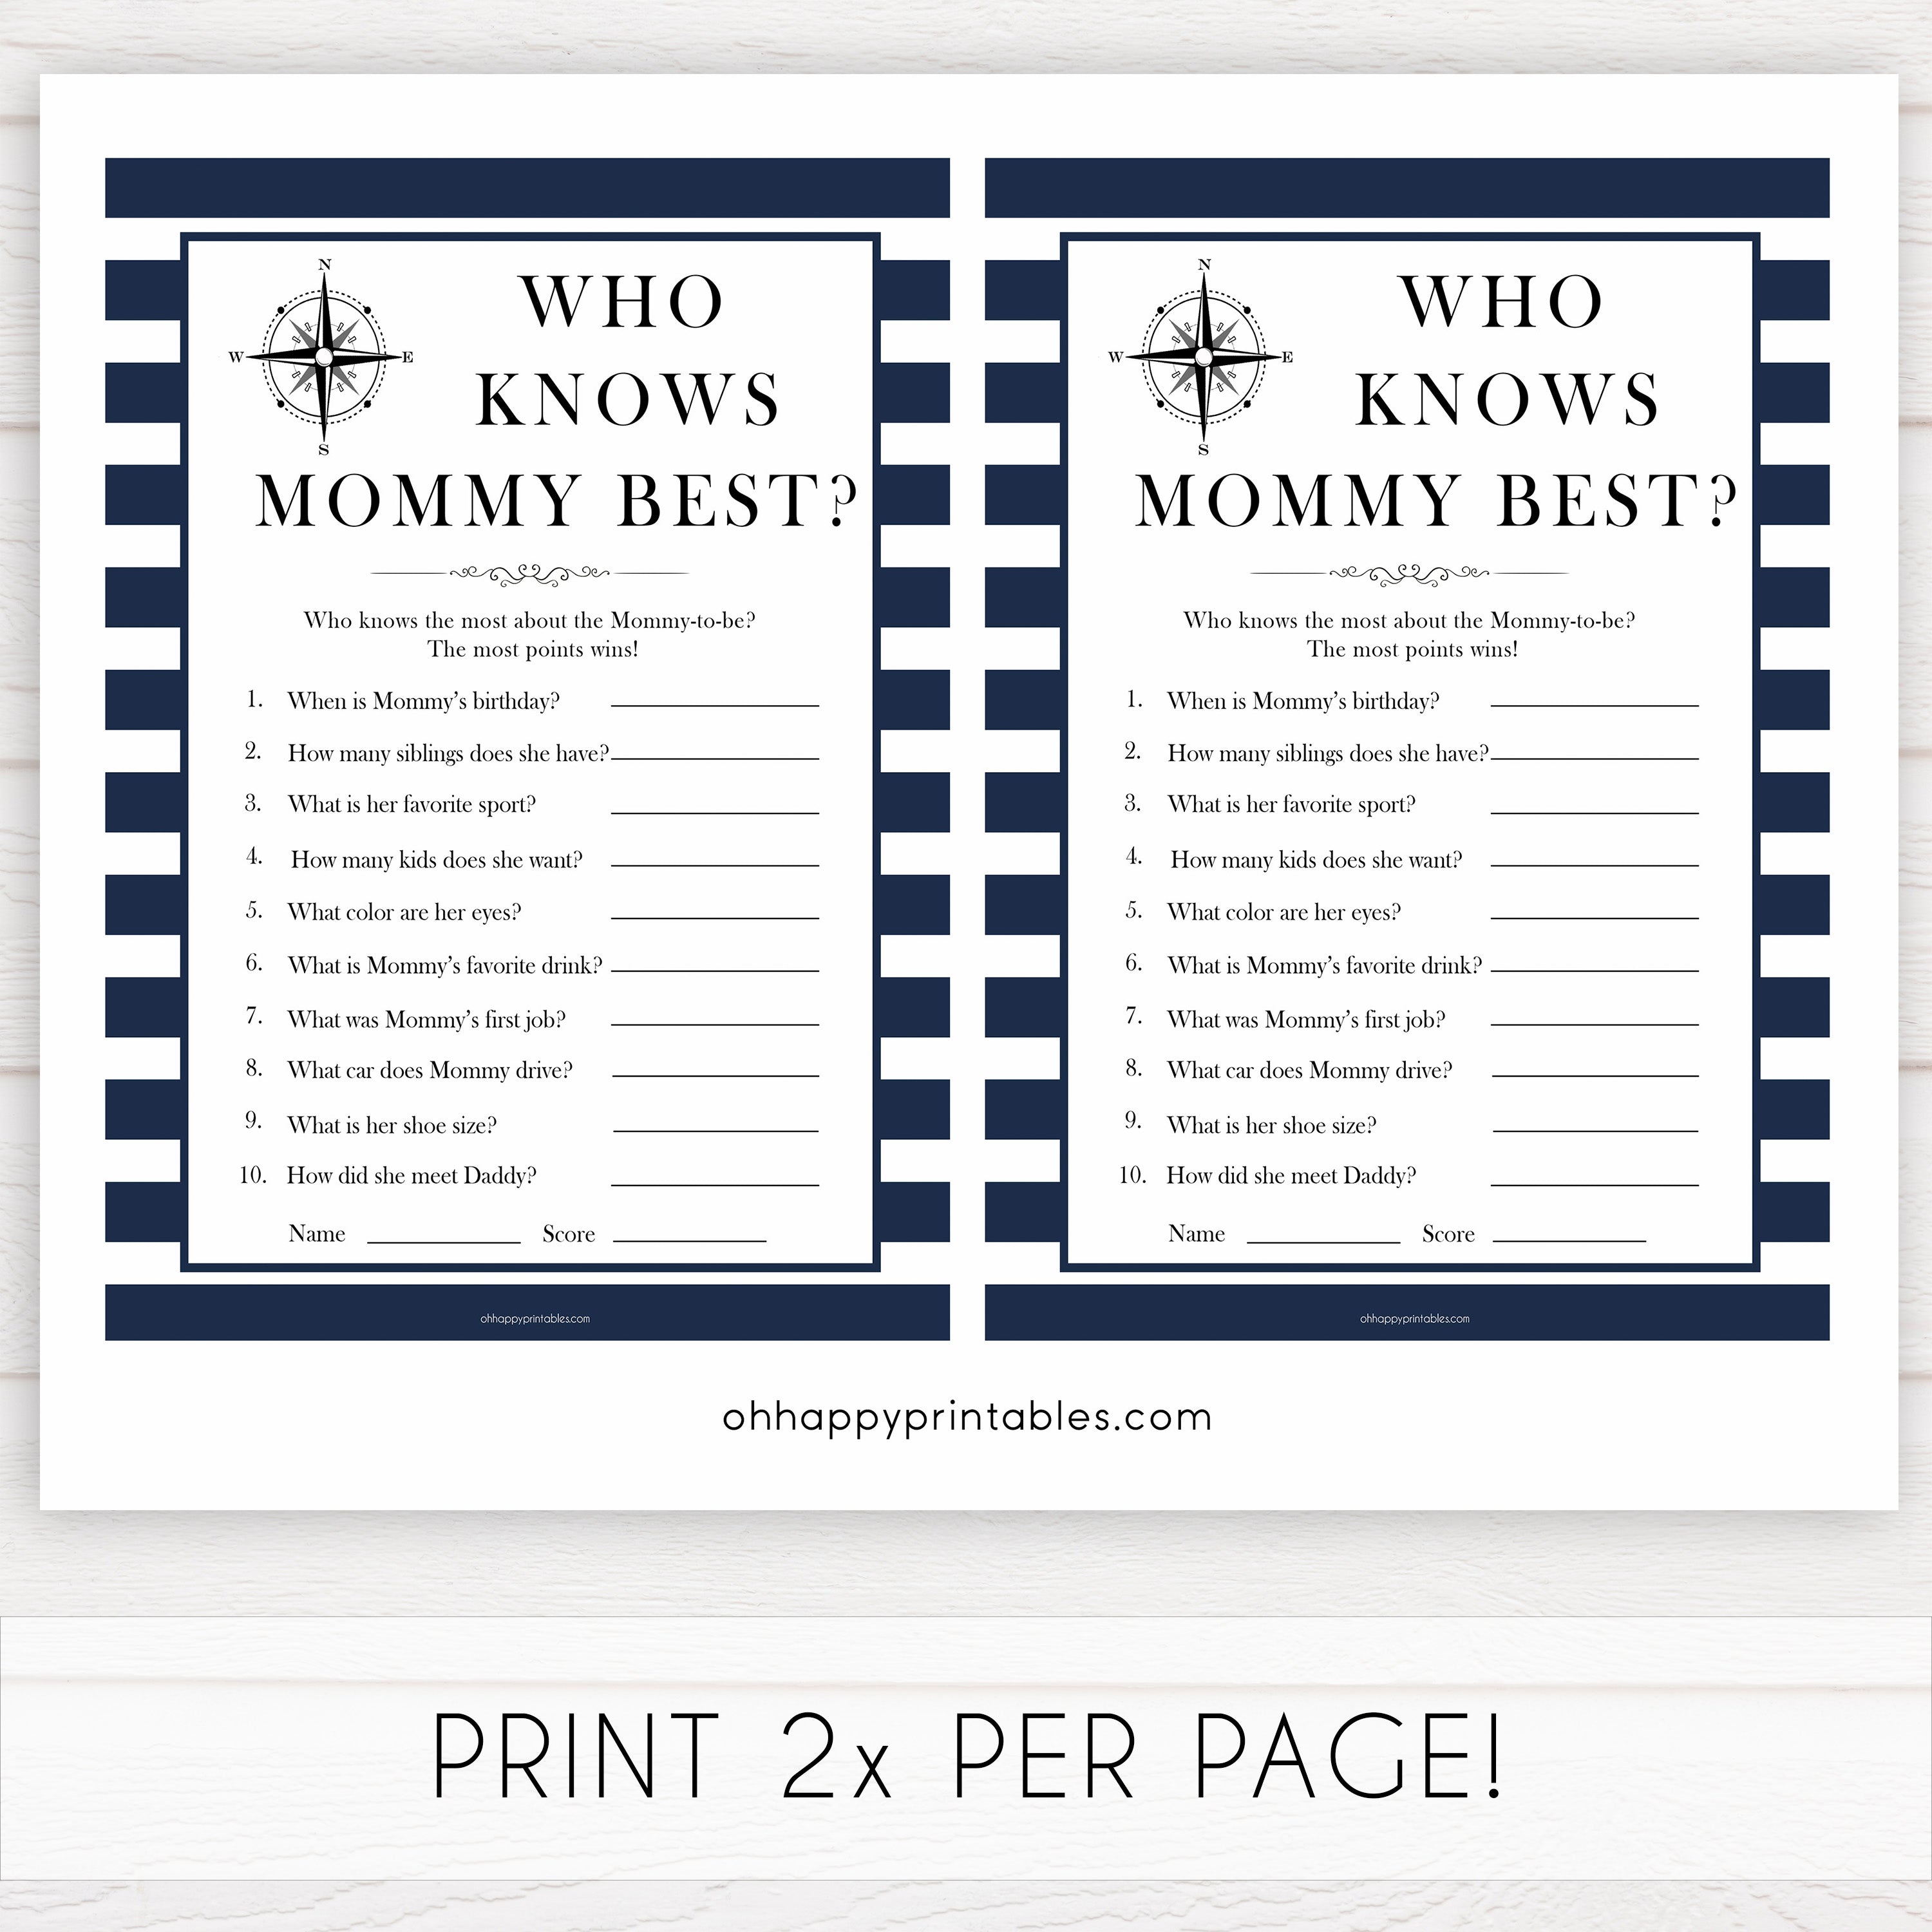 Nautical baby shower games, who knows mummy best baby shower games, printable baby shower games, baby shower games, fun baby games, ahoy its a boy, popular baby shower games, sailor baby games, boat baby games